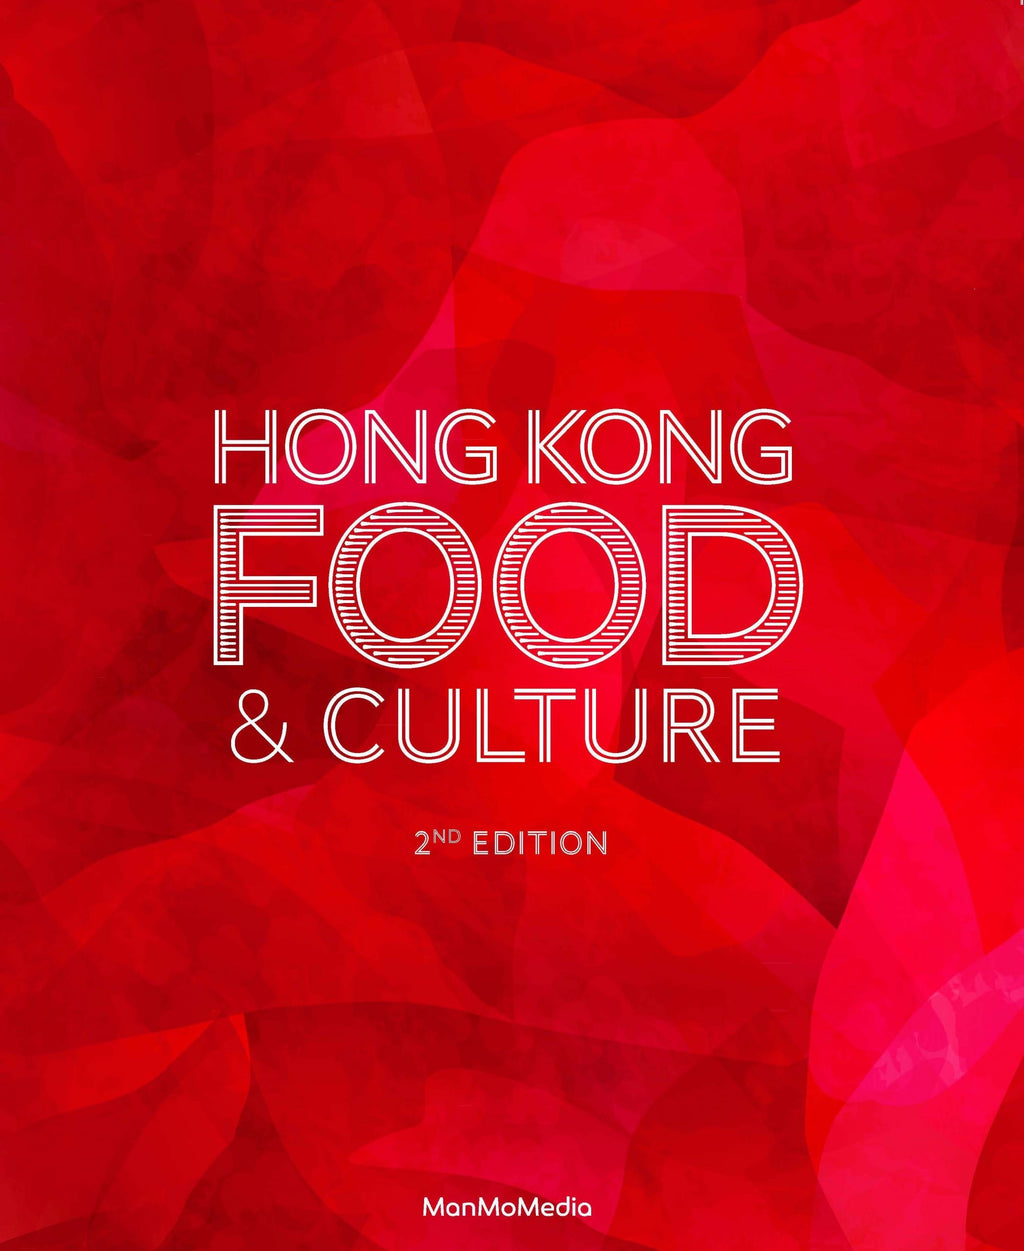 Hong Kong Food & Culture 2nd Edition by Adele Wong